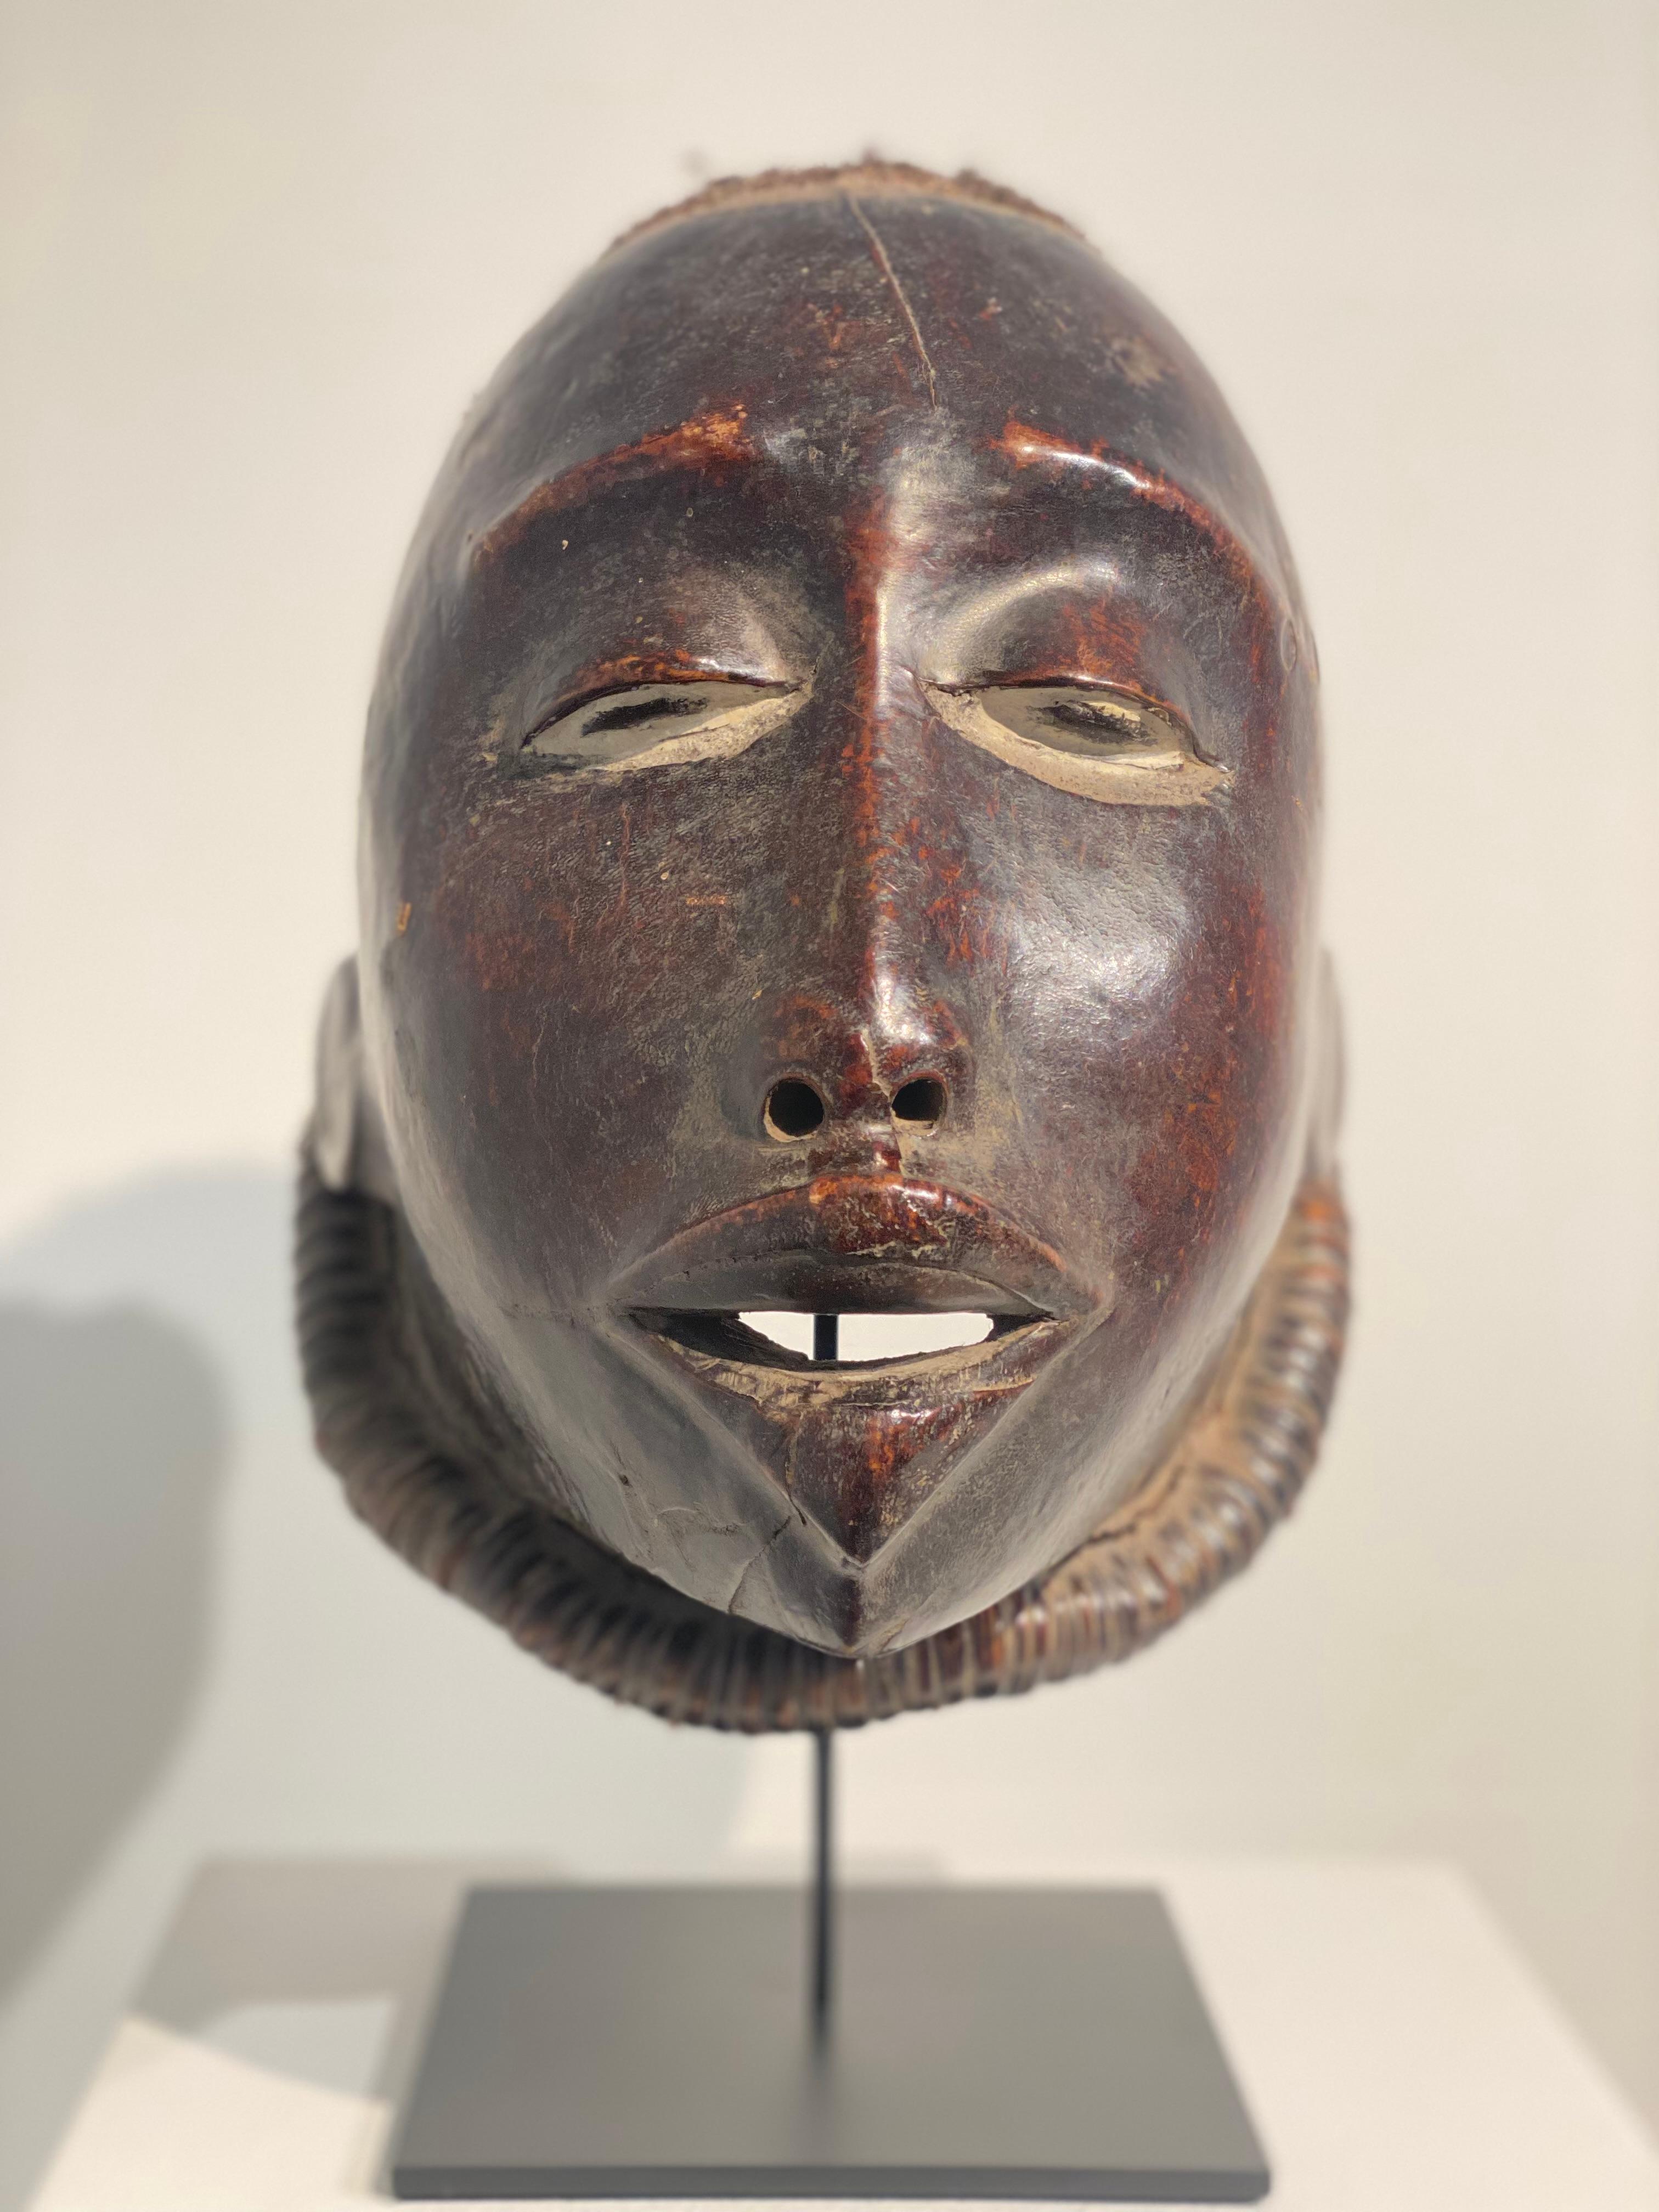 Beautiful African Mask from Mozambique,
Makonde Tribe, from around 1965,
the mask has a great old patina and shine,
made of wood and animal skin and human air,
powerful collecters item